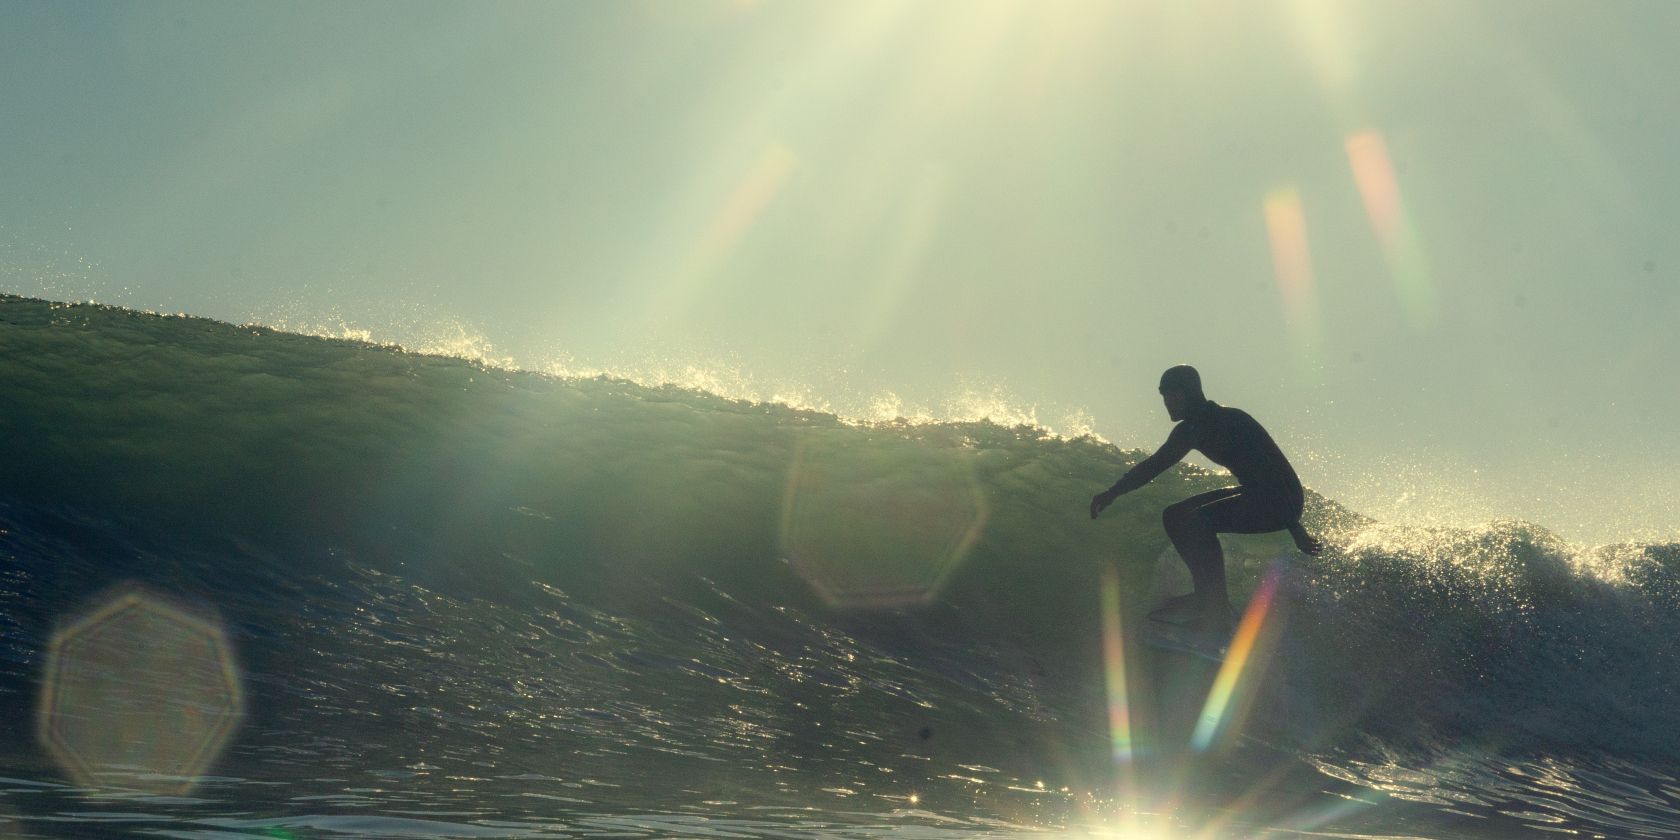 Photo of a person surfing with lens flare in the image